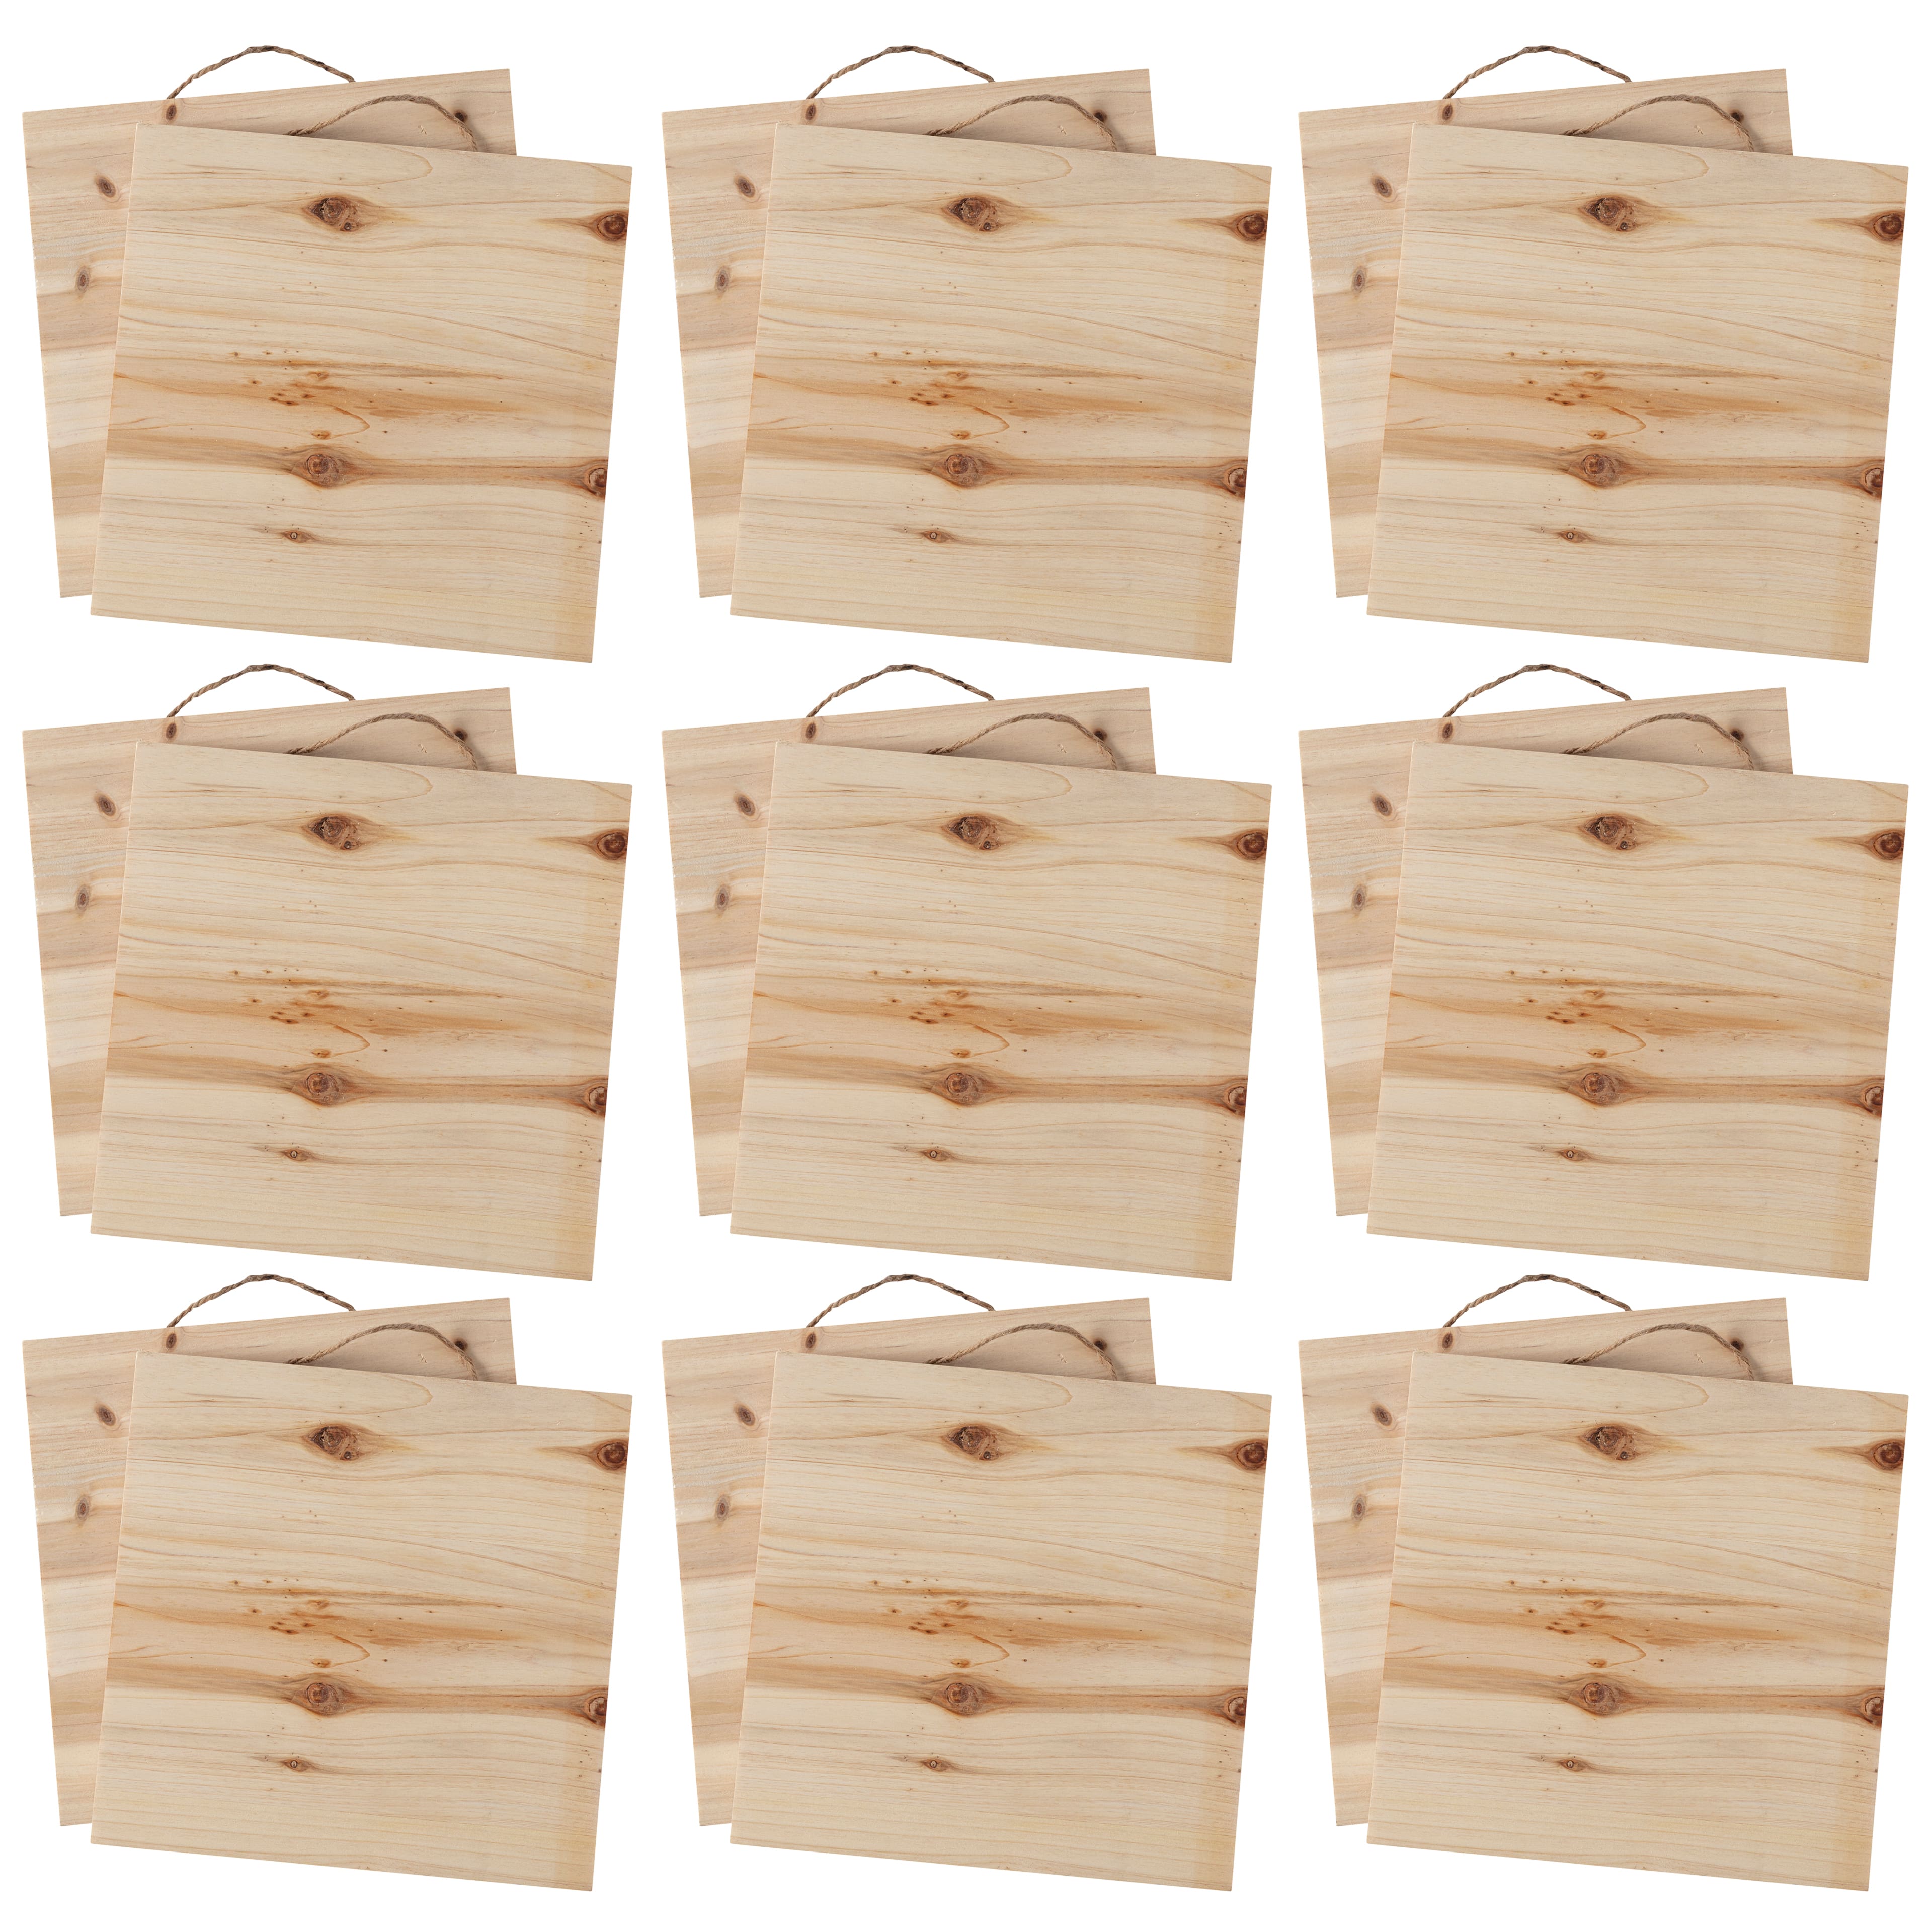 6 Pack: 13 Wooden Tray by Make Market®